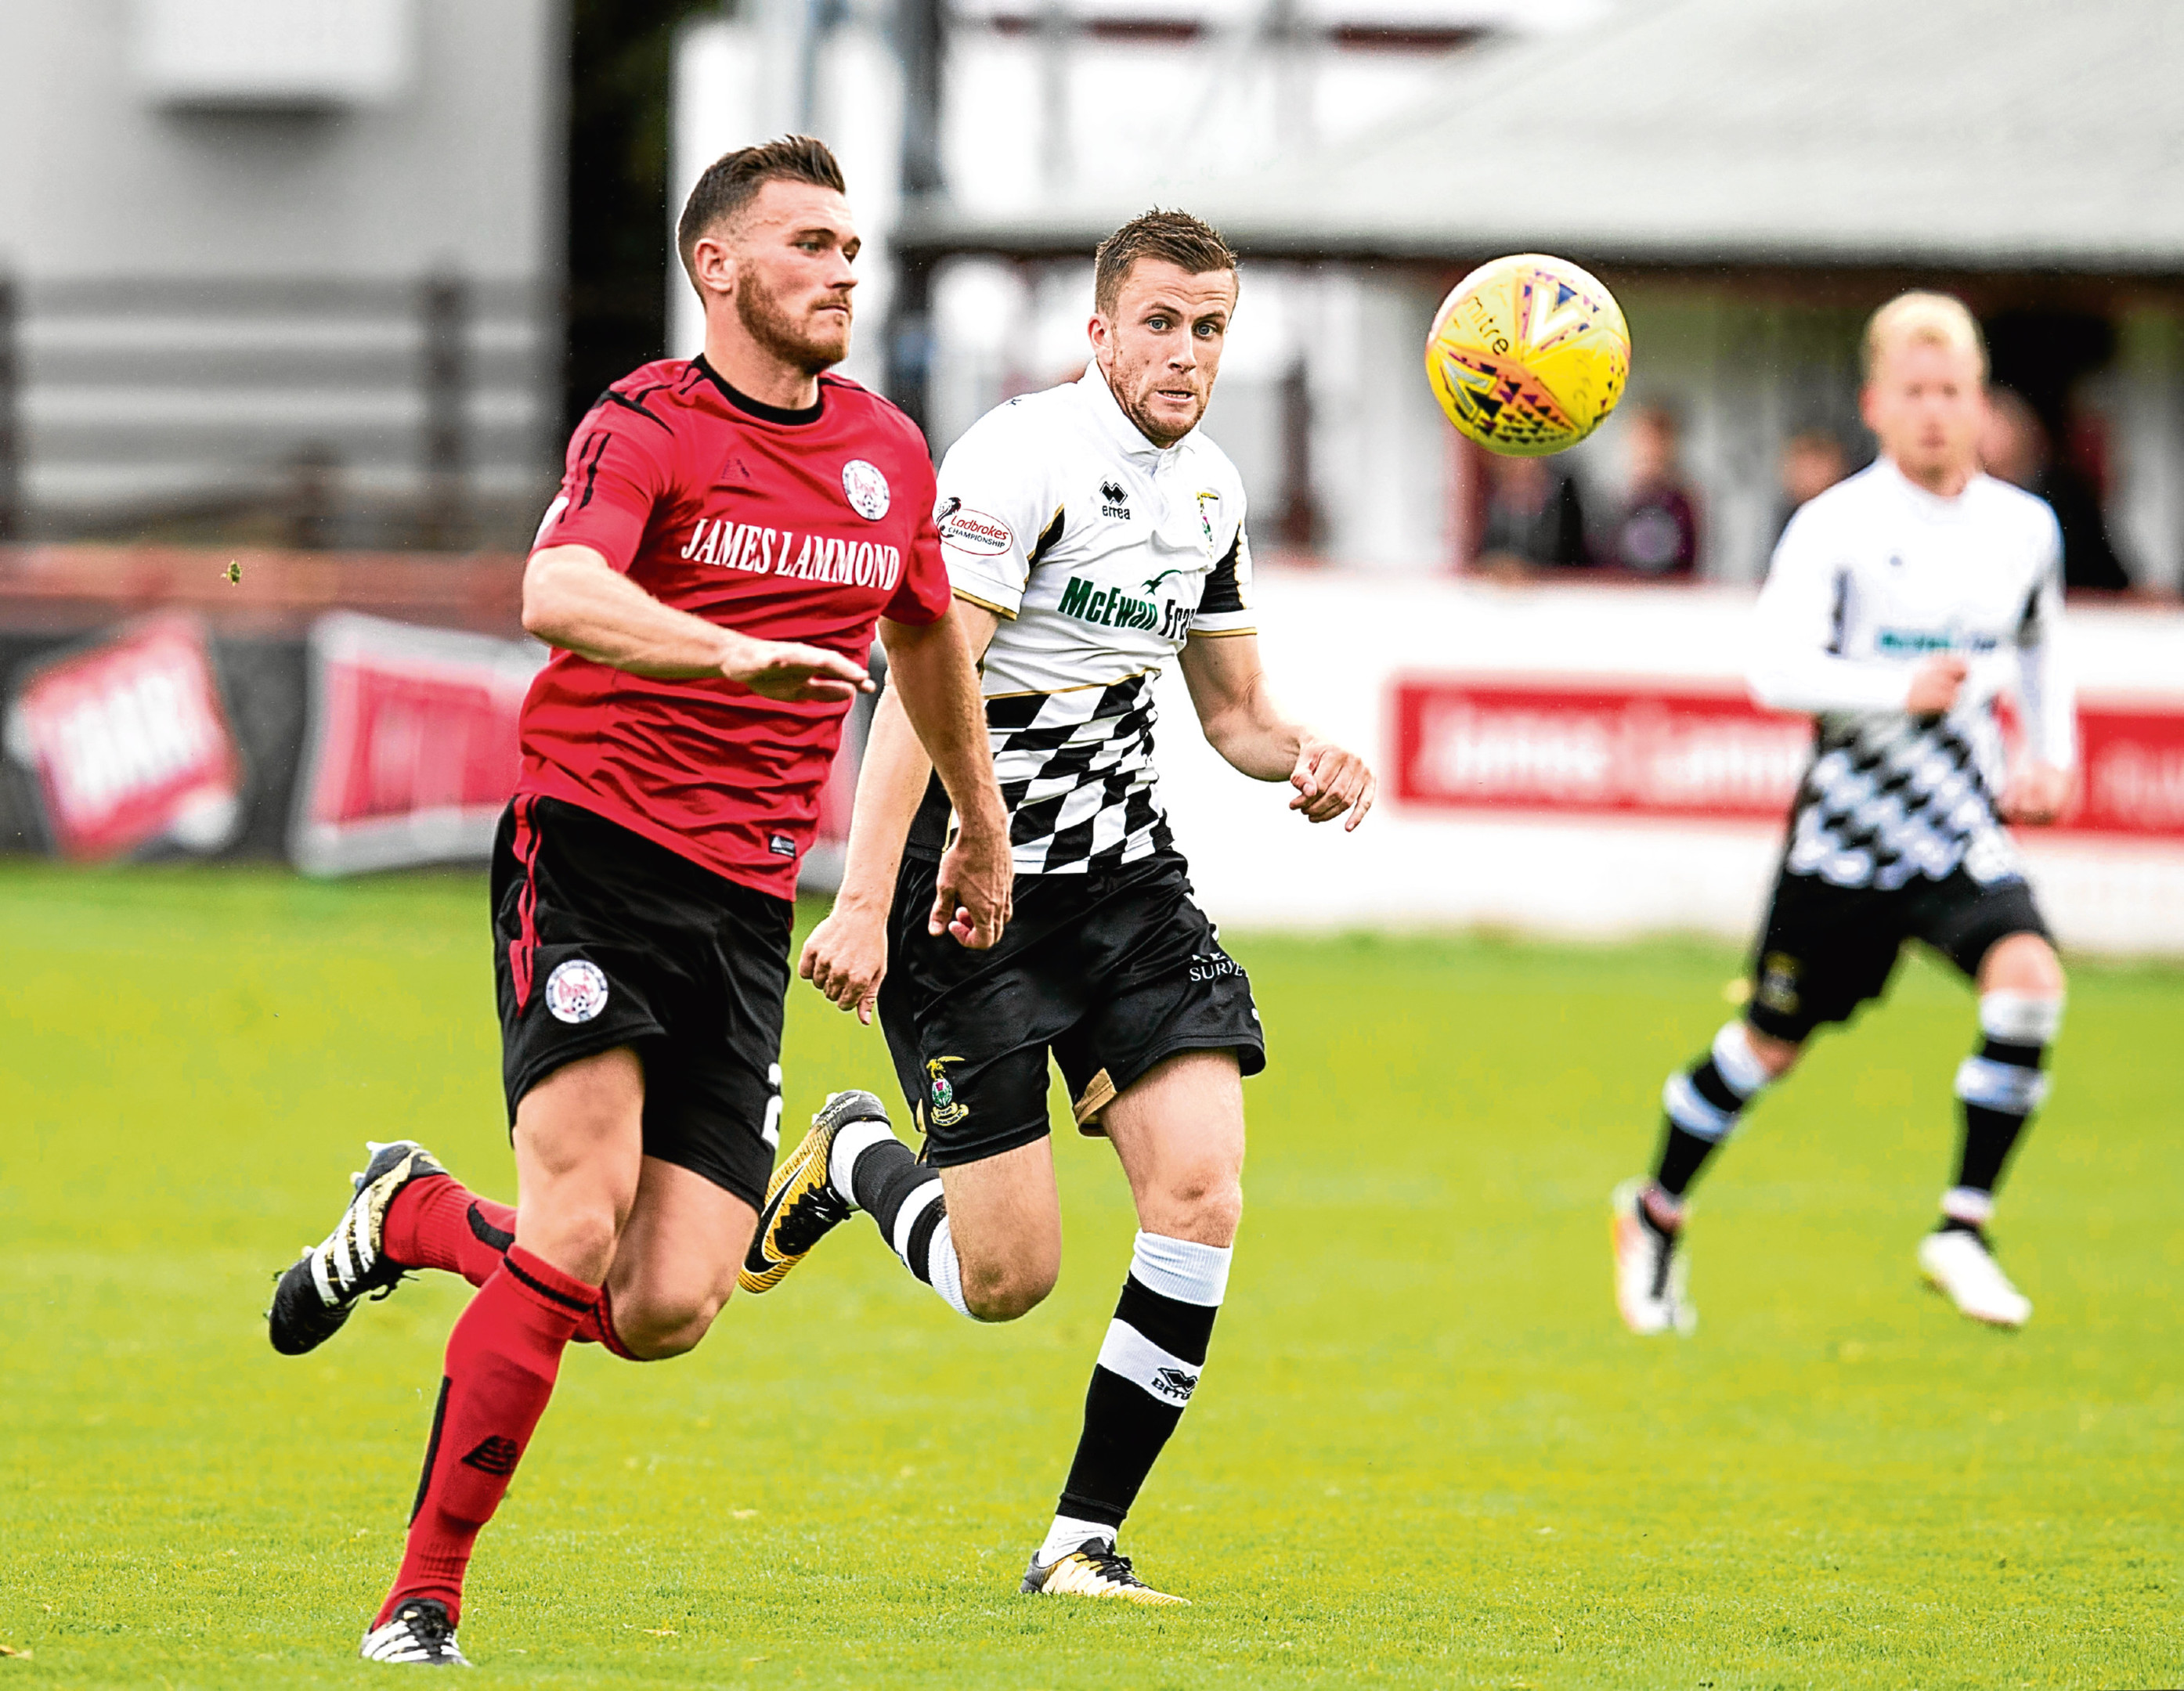 Action from a previous game between Brechin and Inverness.